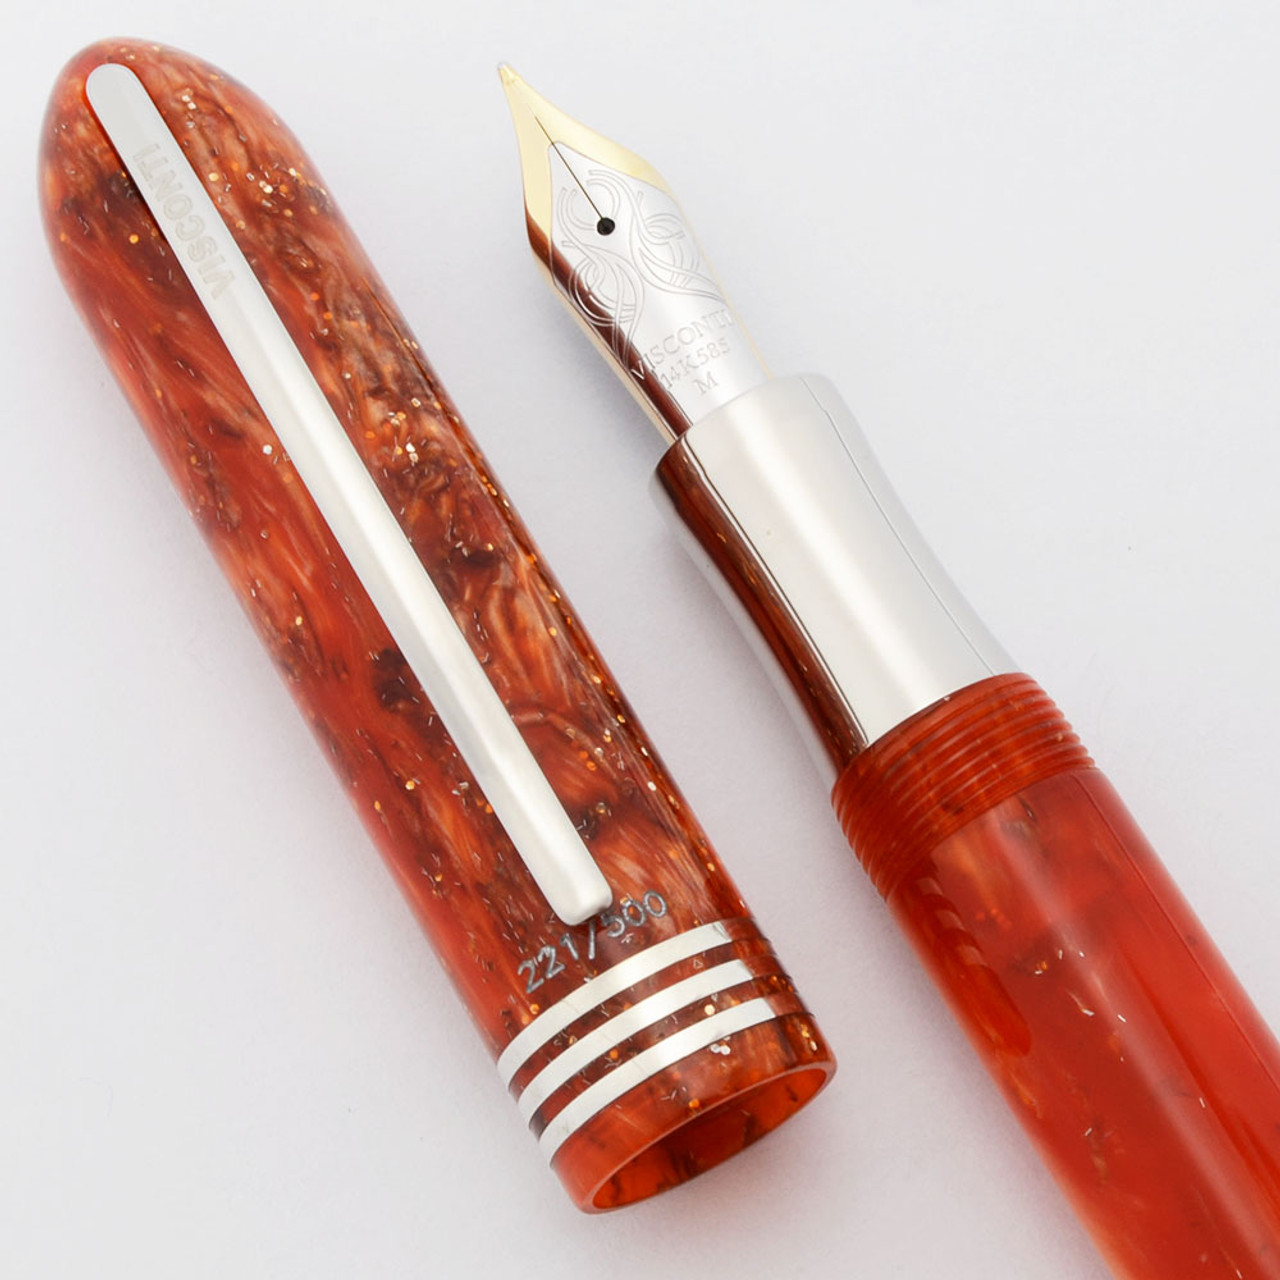 Visconti Amigdala "You and Me" LE Fountain Pen - Orange Marble w/sparkles, C/C, Medium 14k Nib (Excellent, Works Well)